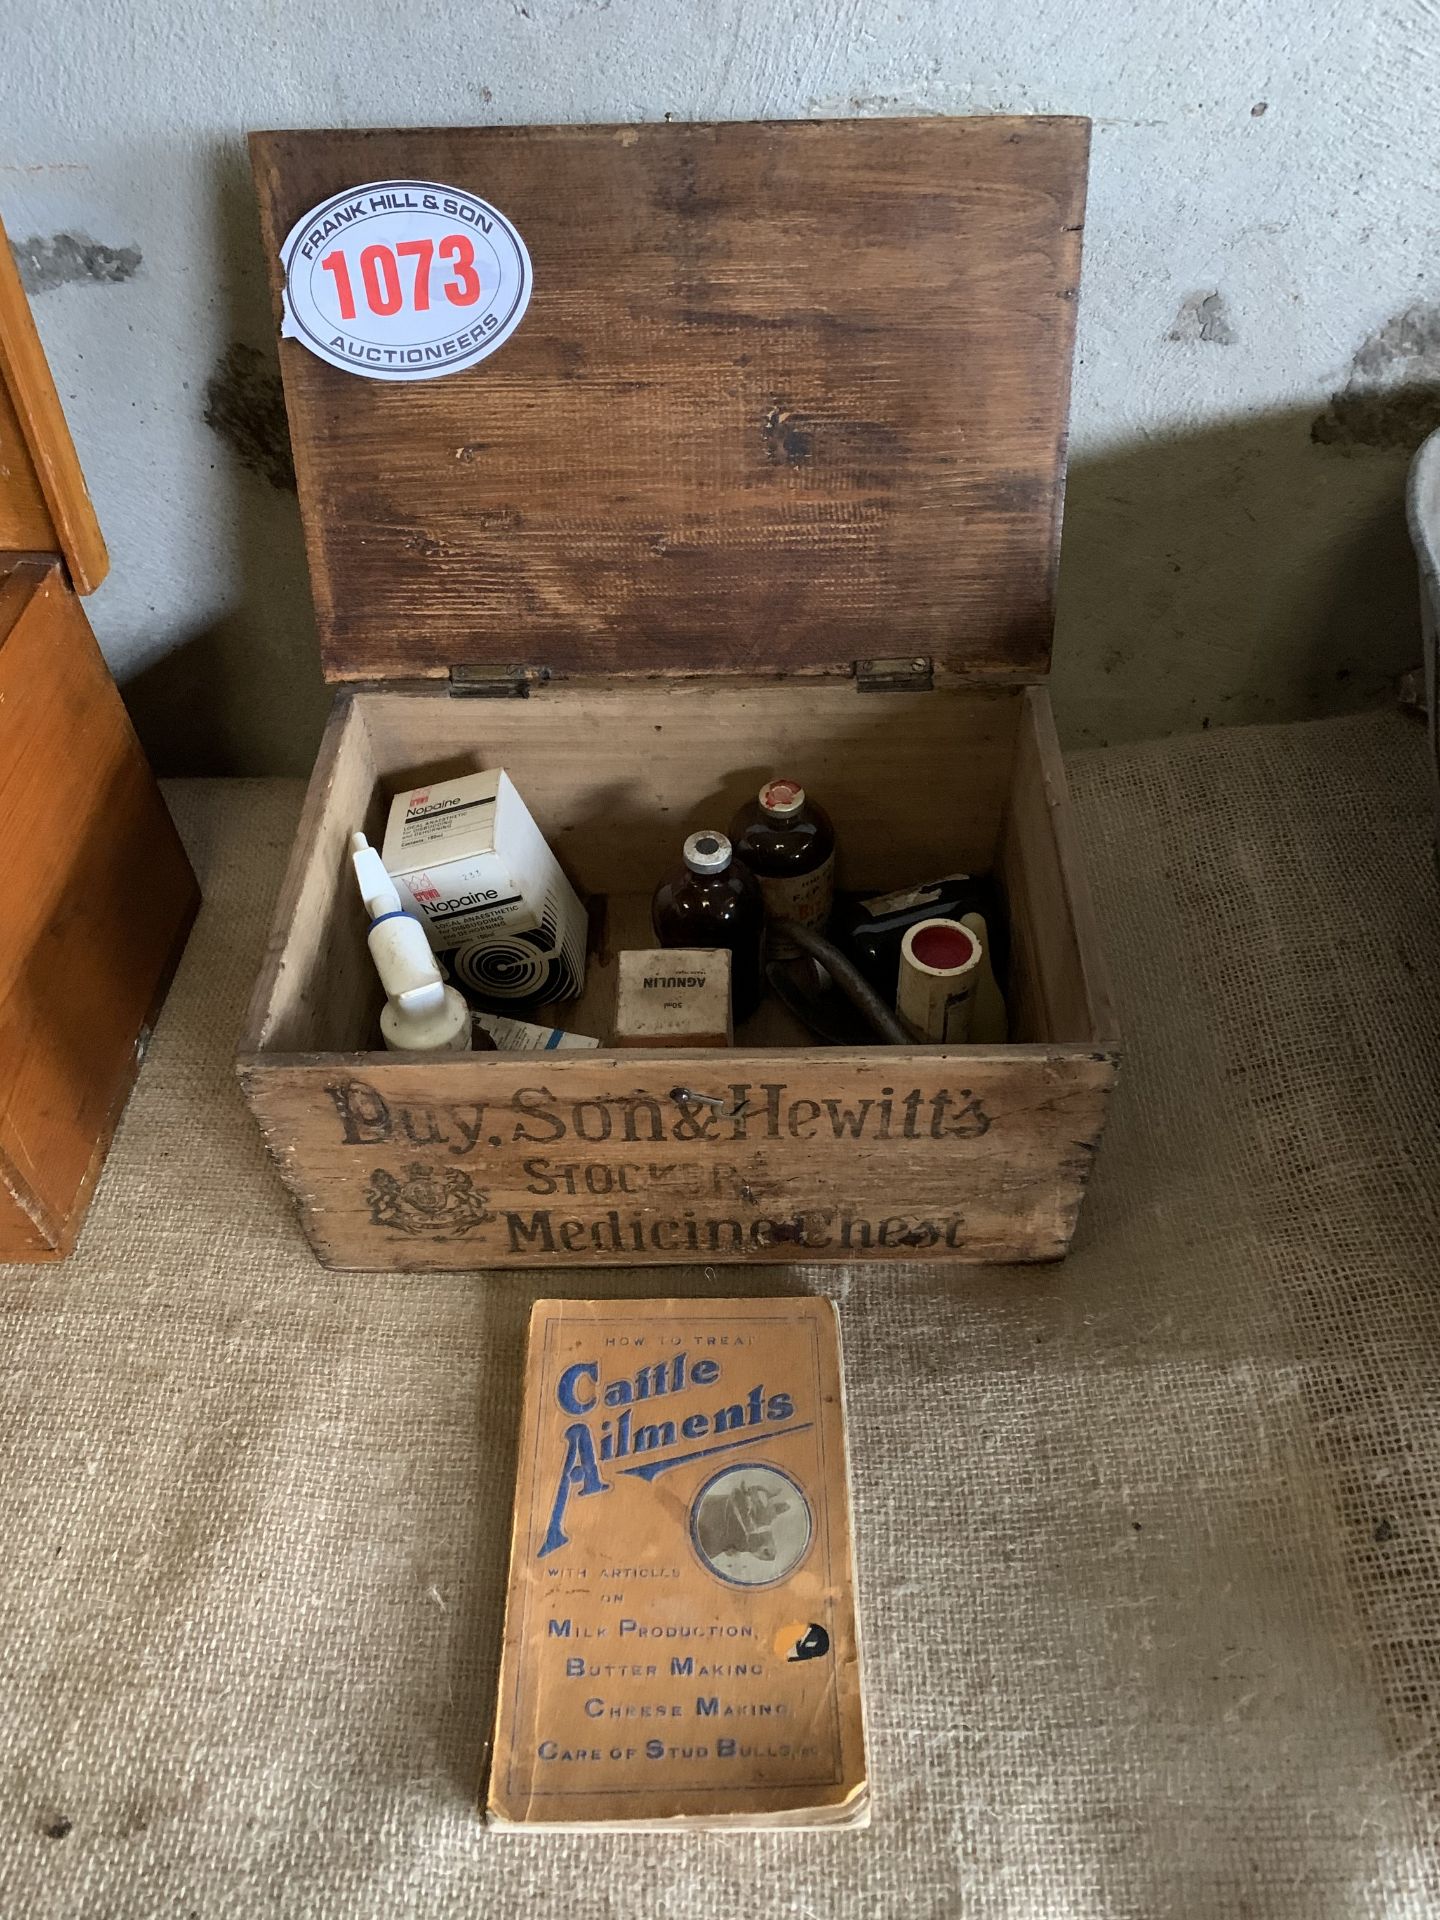 Day, Son & Hewitt's stockman's medicine chest & contents & cattle ailments book